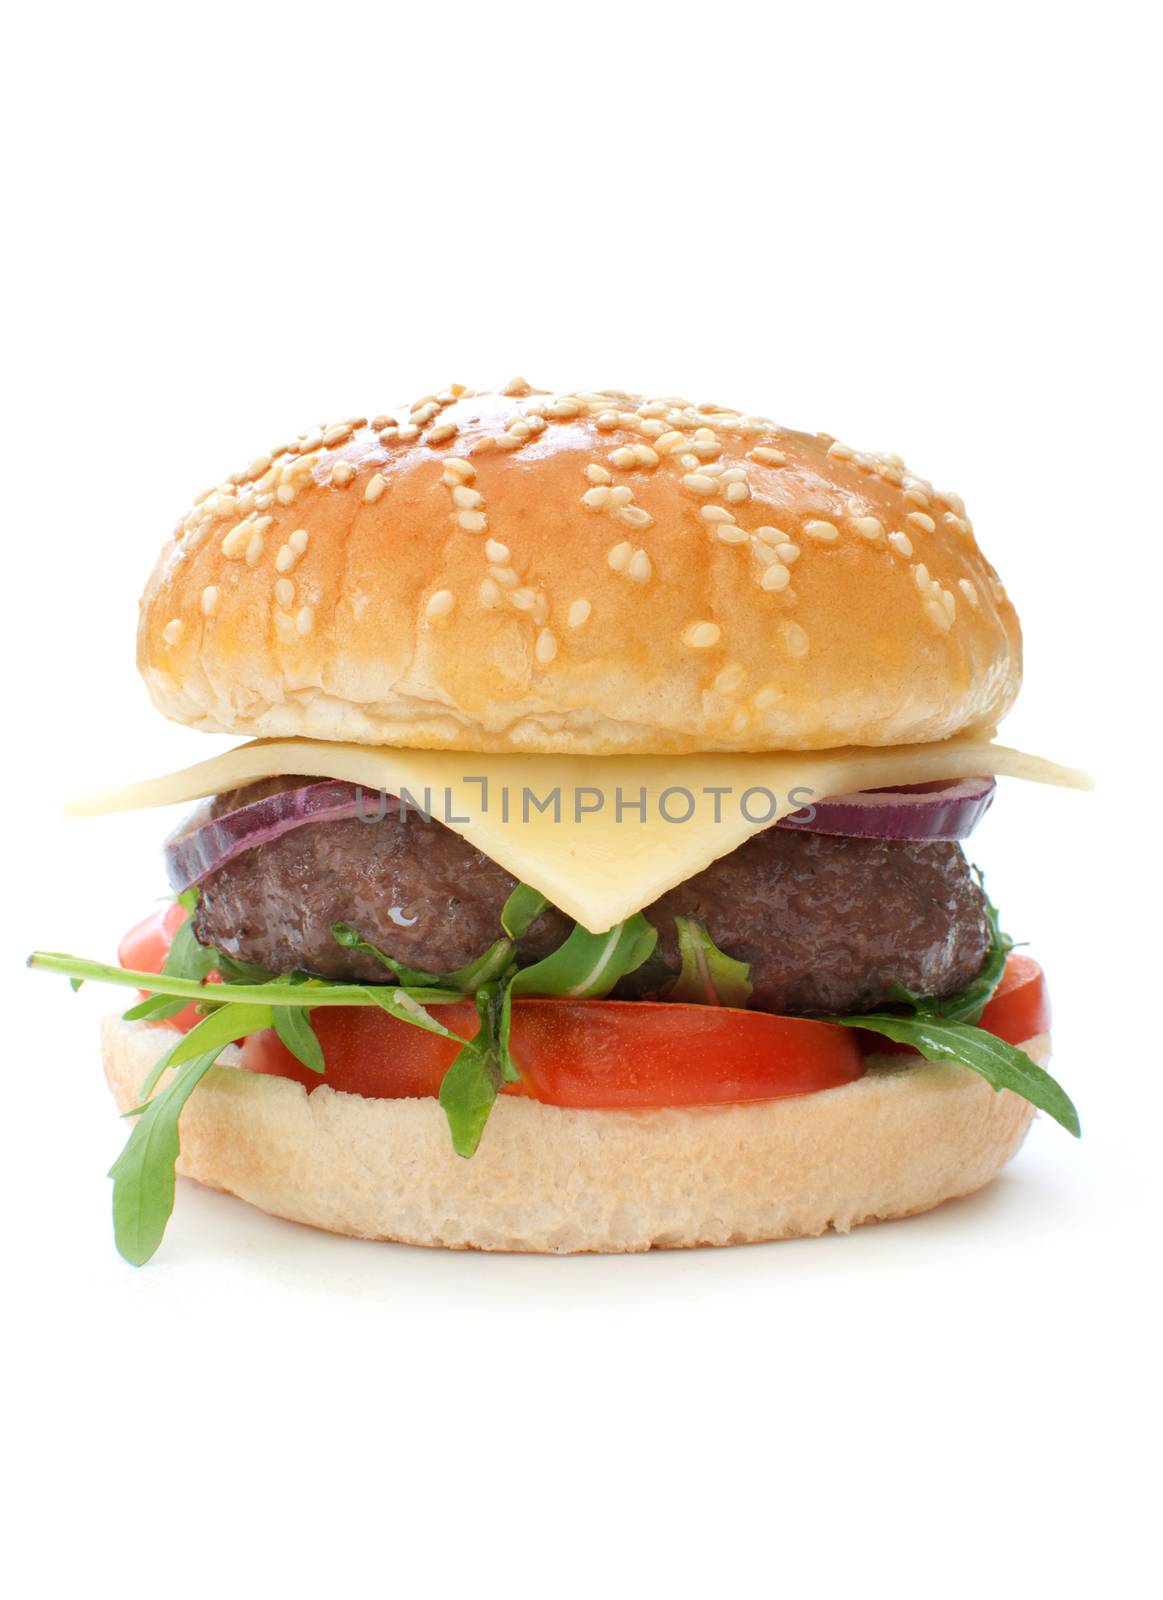 Quarter pounder hamburger with tomatoes onions and lettuce over a white background